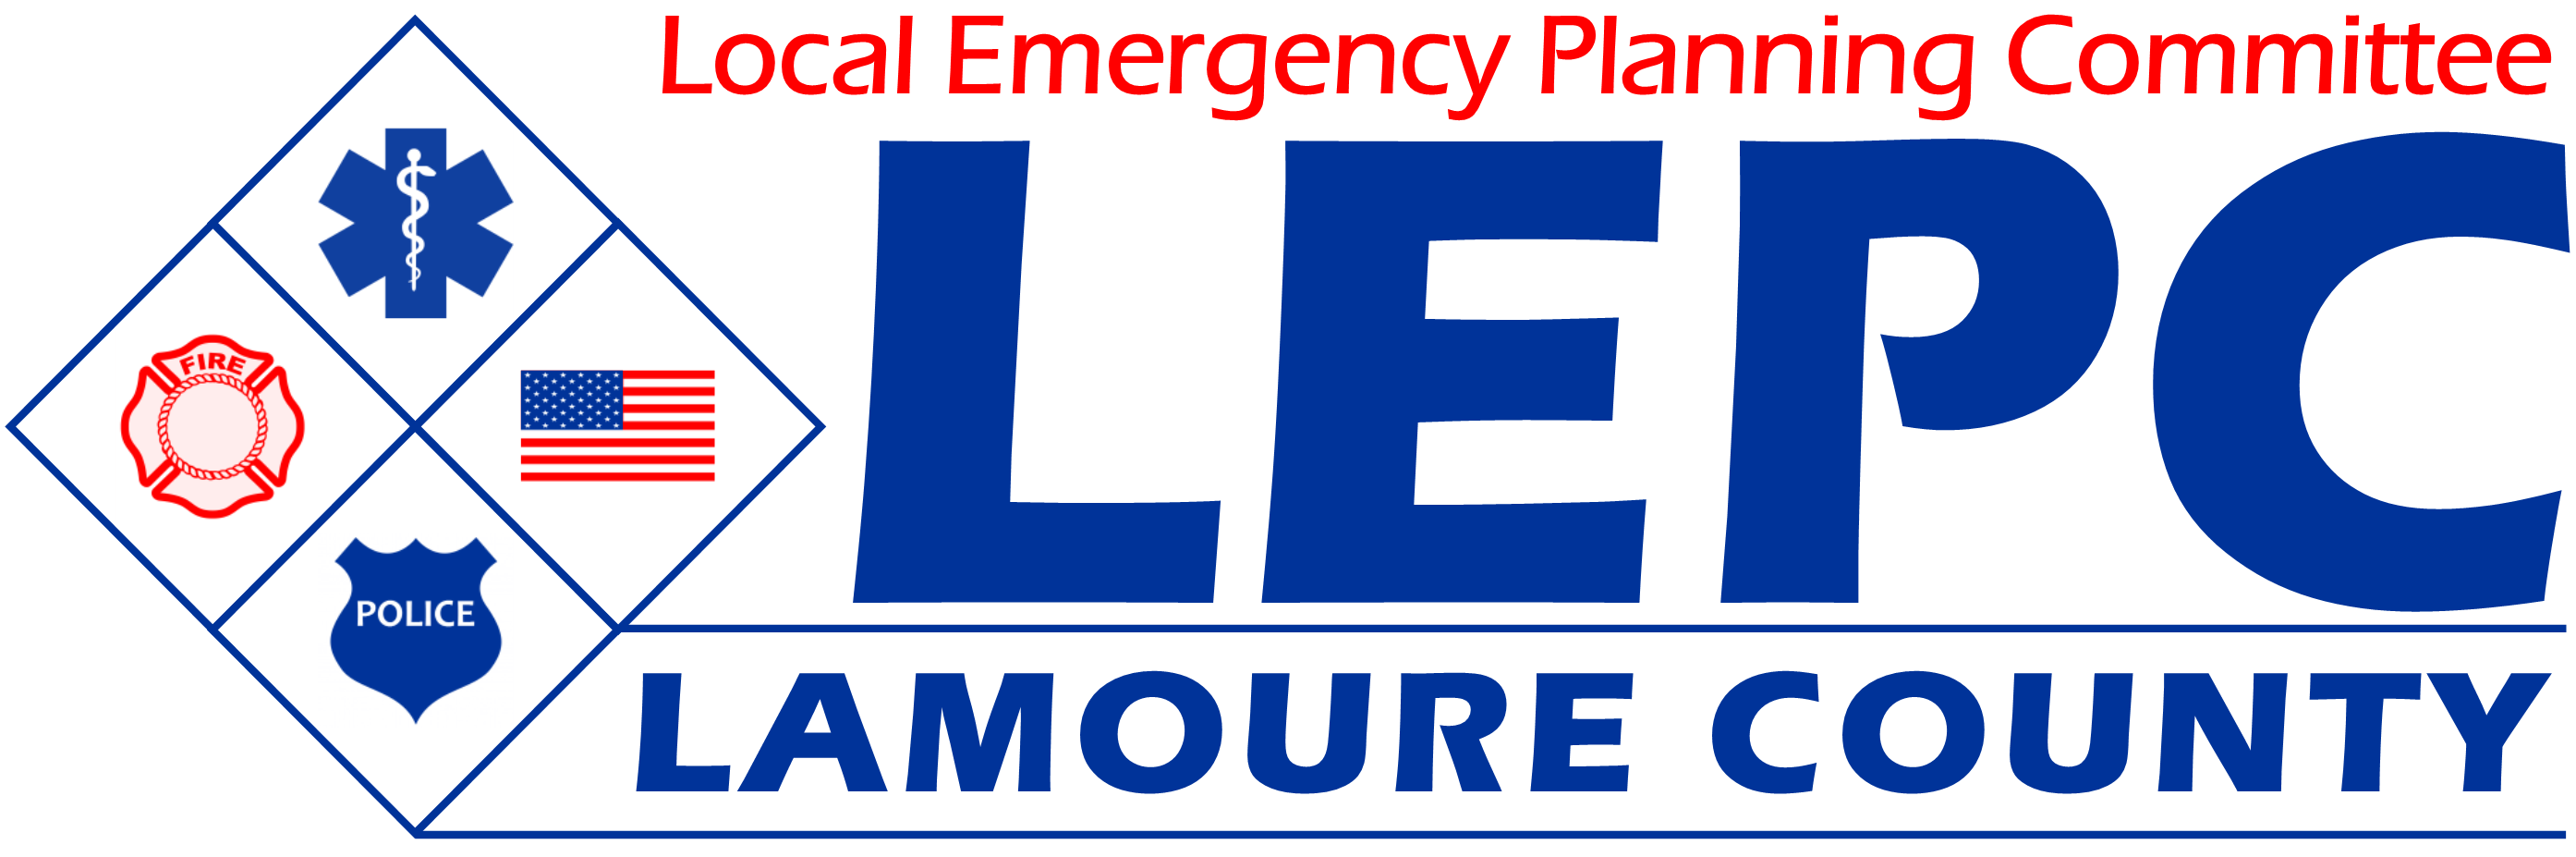 LaMoure County Emergency Planning Committee Logo